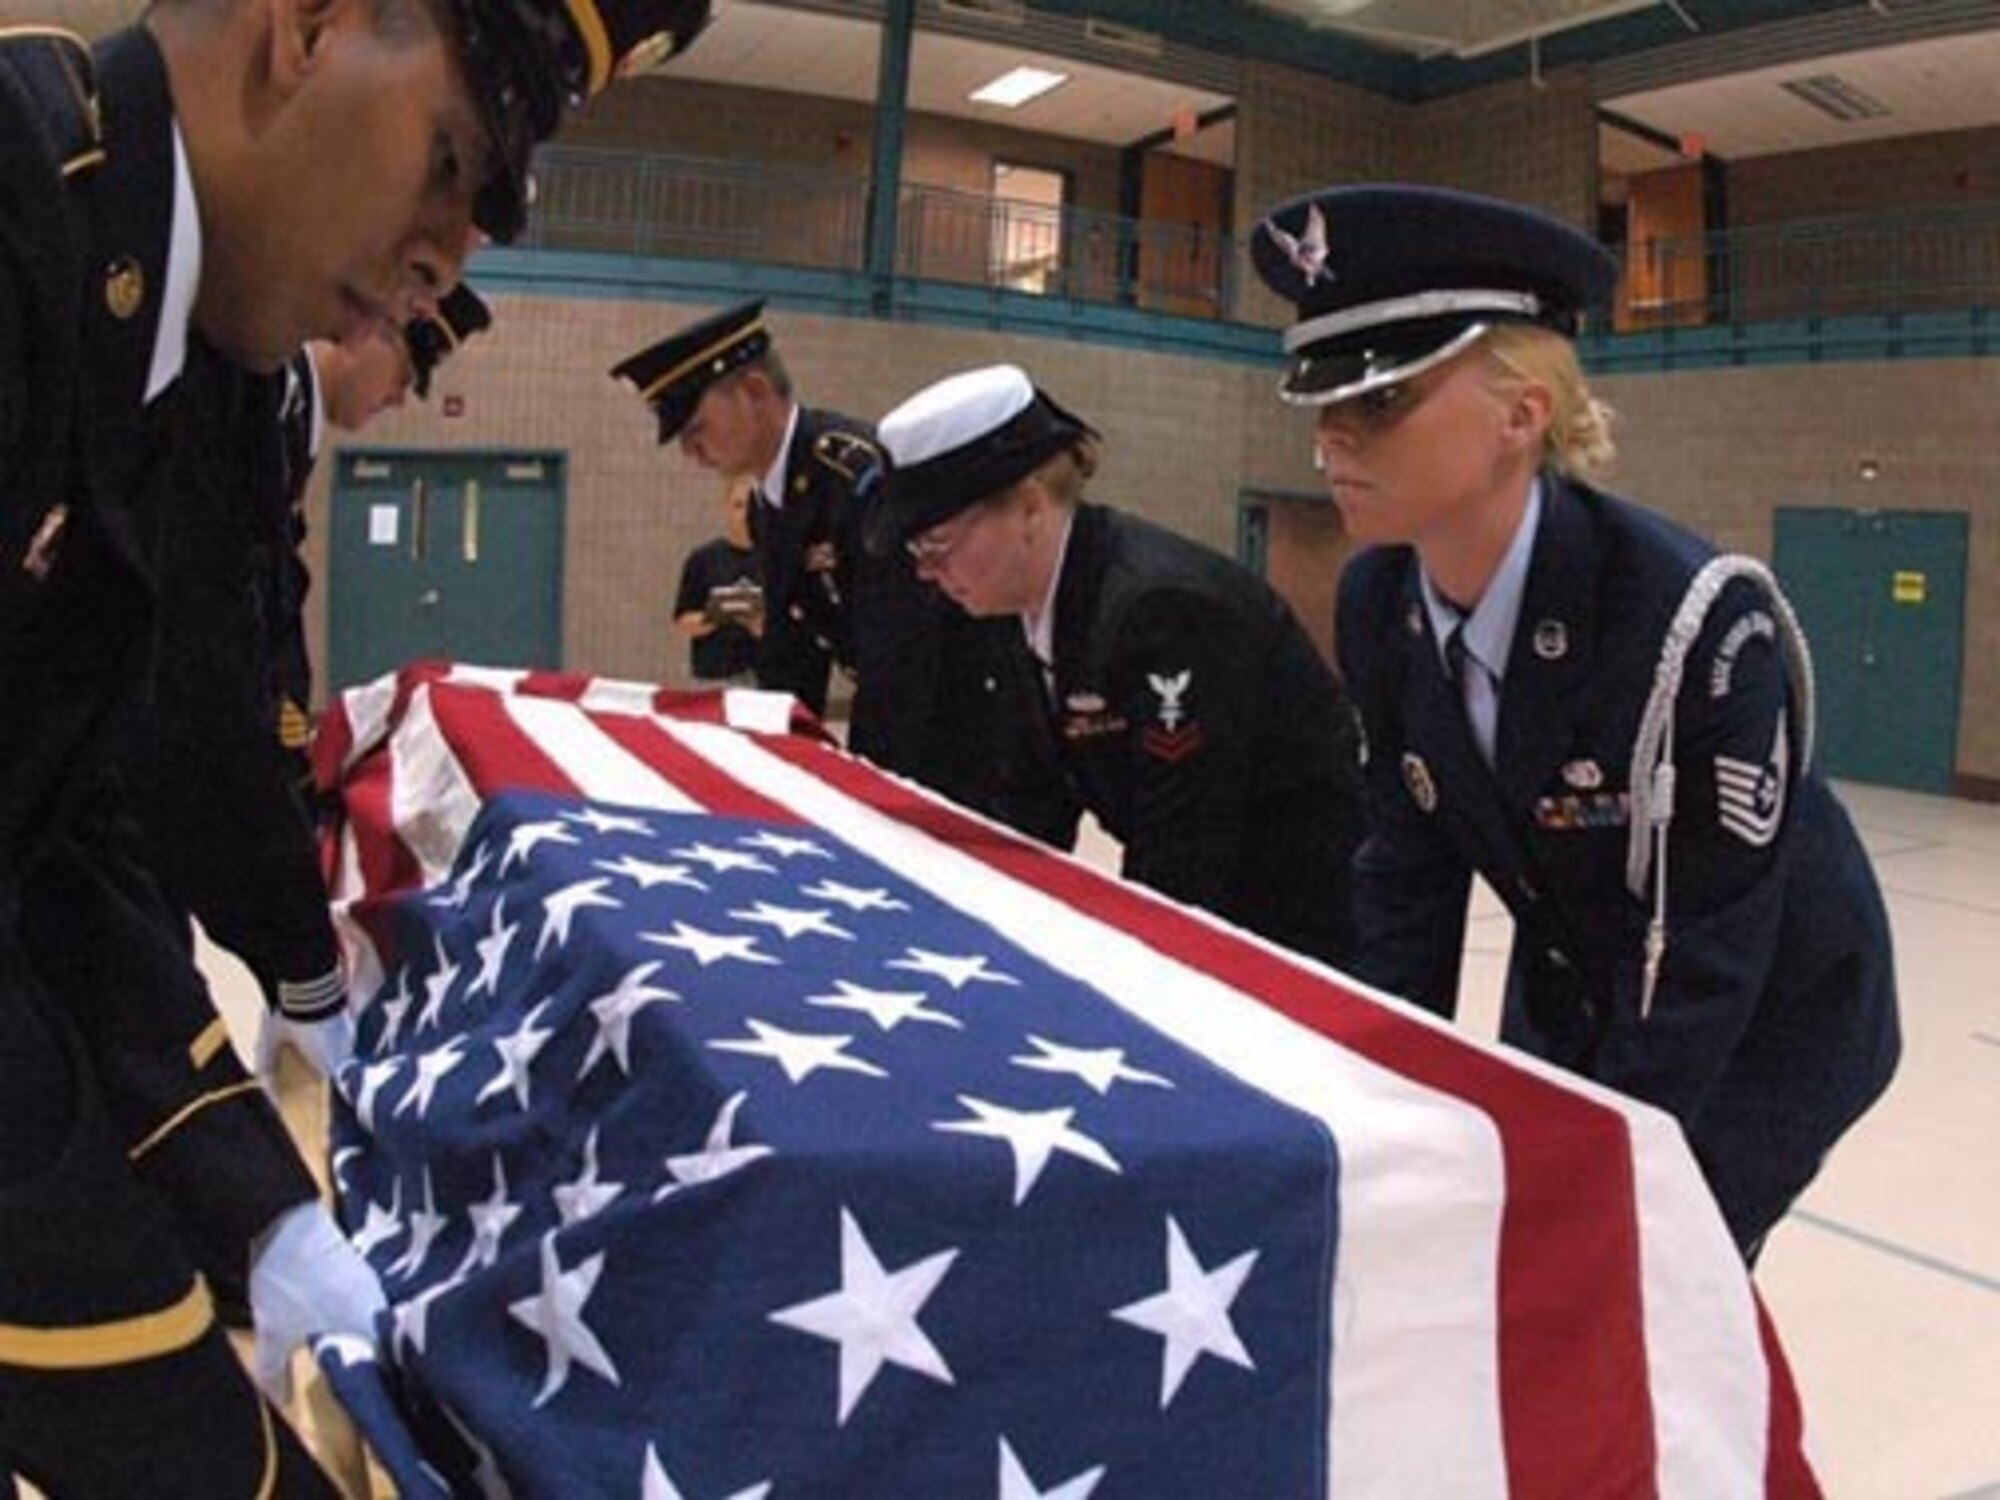 From right to left, Technical Sgt. Jolene R. Savageau, 119th Wing; Petty Officer 2nd Class Mary Sims; SPC Kacey Kruger; Staff Sgt. Travis Hackey; SPC Jorge Elizondo place a training casket during military funeral honor team training at the Armed Forces Reserve Center, Fargo, N.D., August 17, 2007.  (USAF photo/SMSgt. David Lipp)
